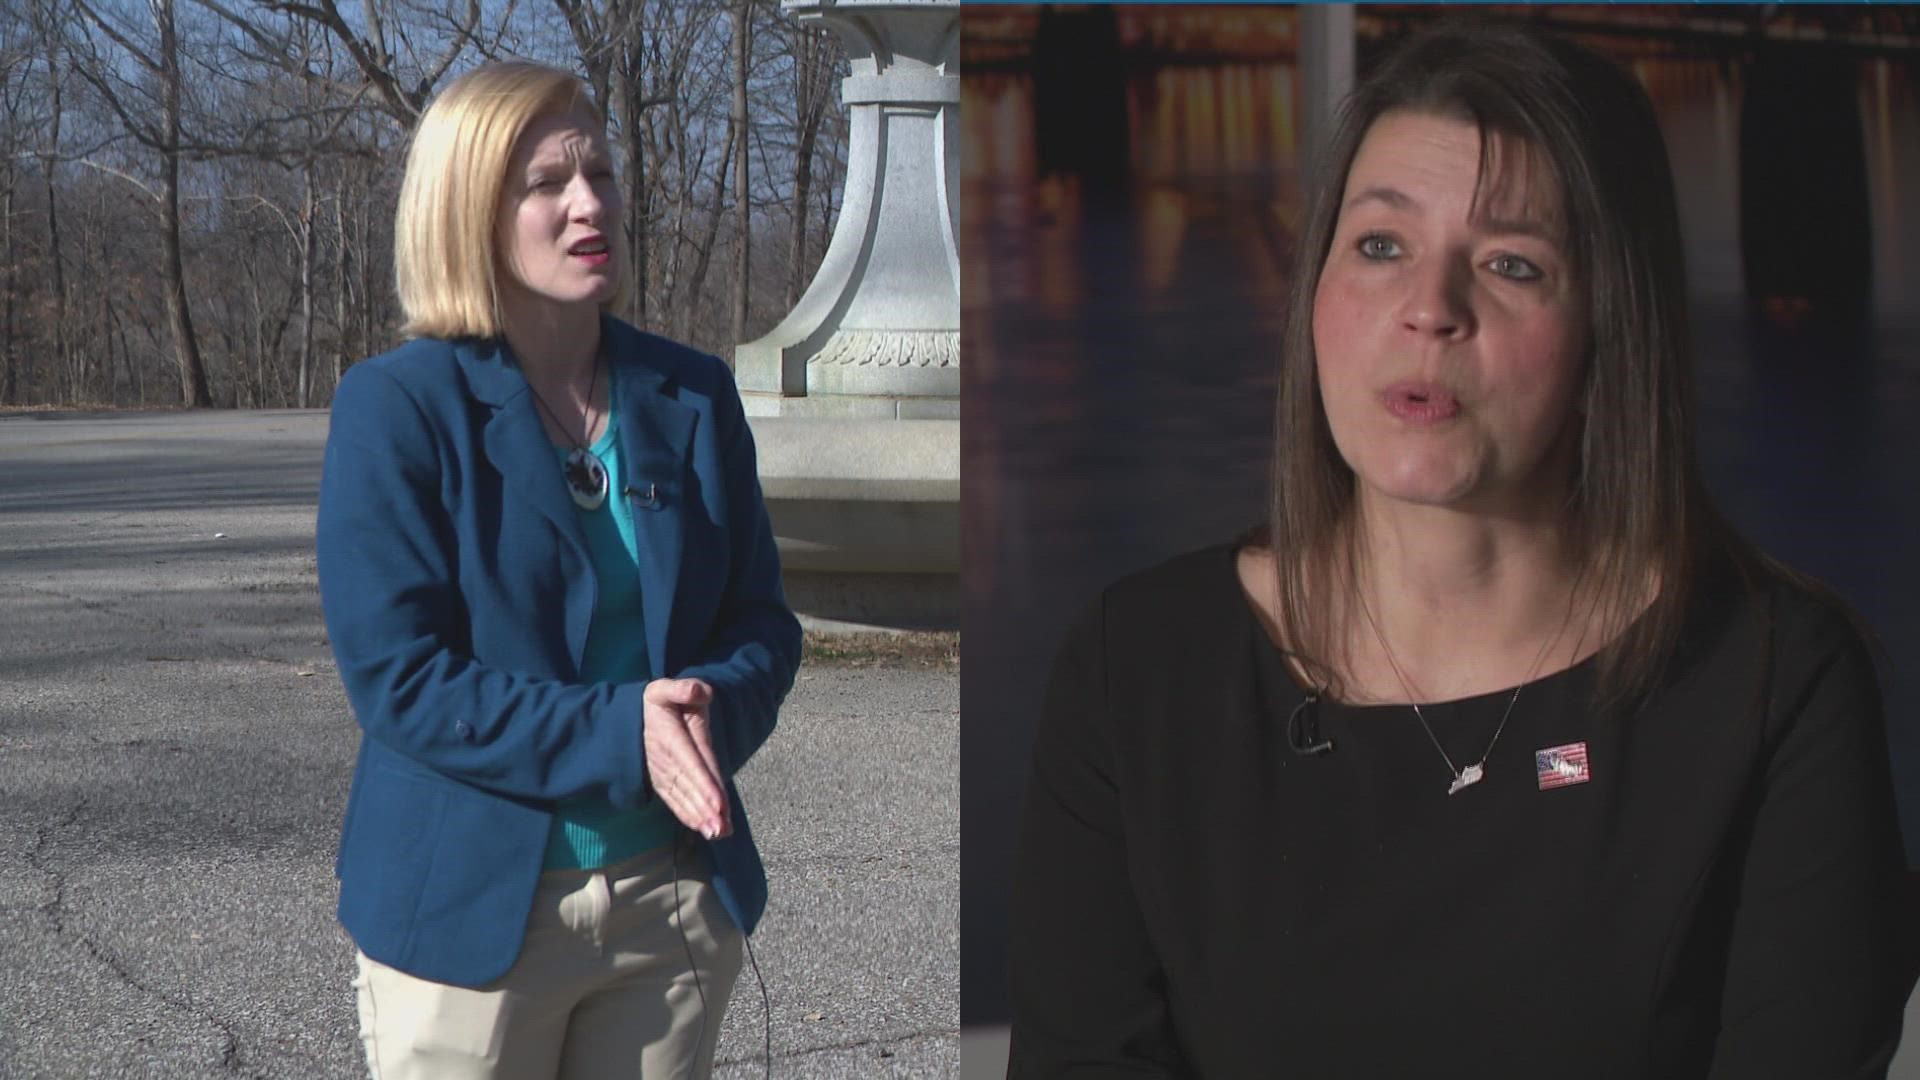 Democrat Metro Councilwoman Cassie Chambers Armstrong and Republican Misty Glinn are seeking to fill the seat left vacant by Congressman Morgan McGarvey.